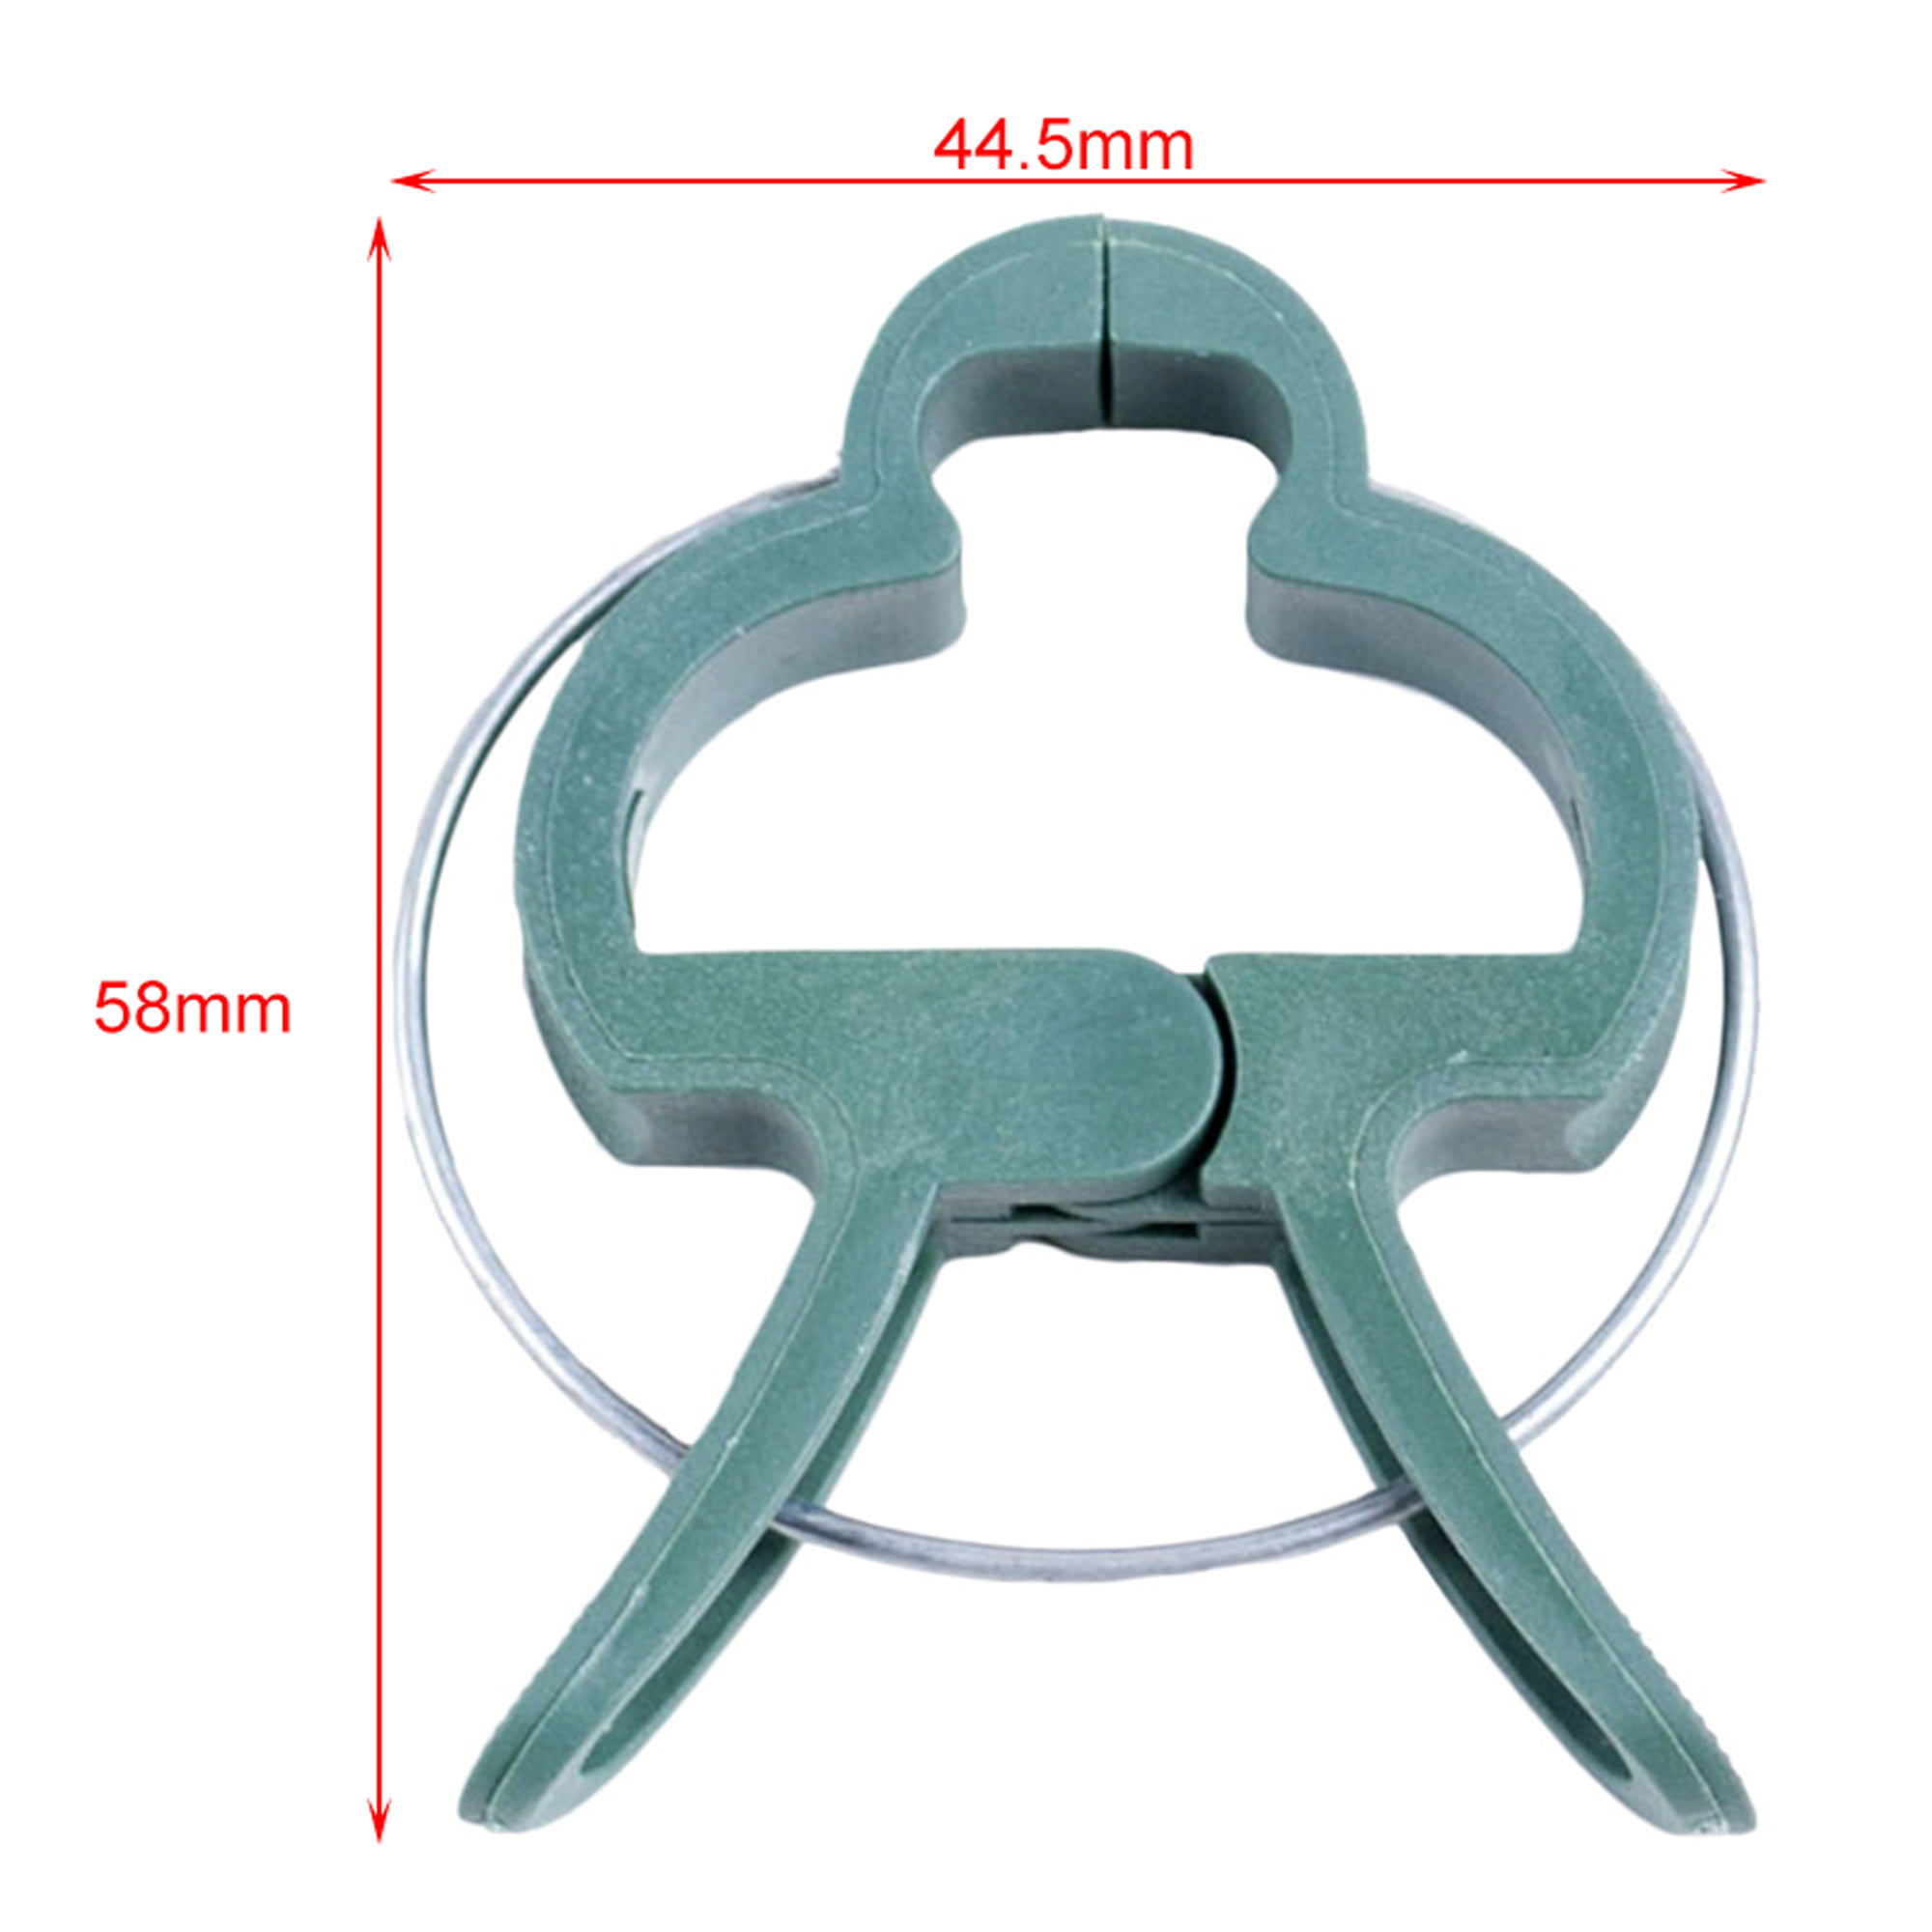 NEW REUSABLE PLANT CLIPS PATIO SUPPORT FIXING CLIPS SPRING GARDENING PACK OF 2 